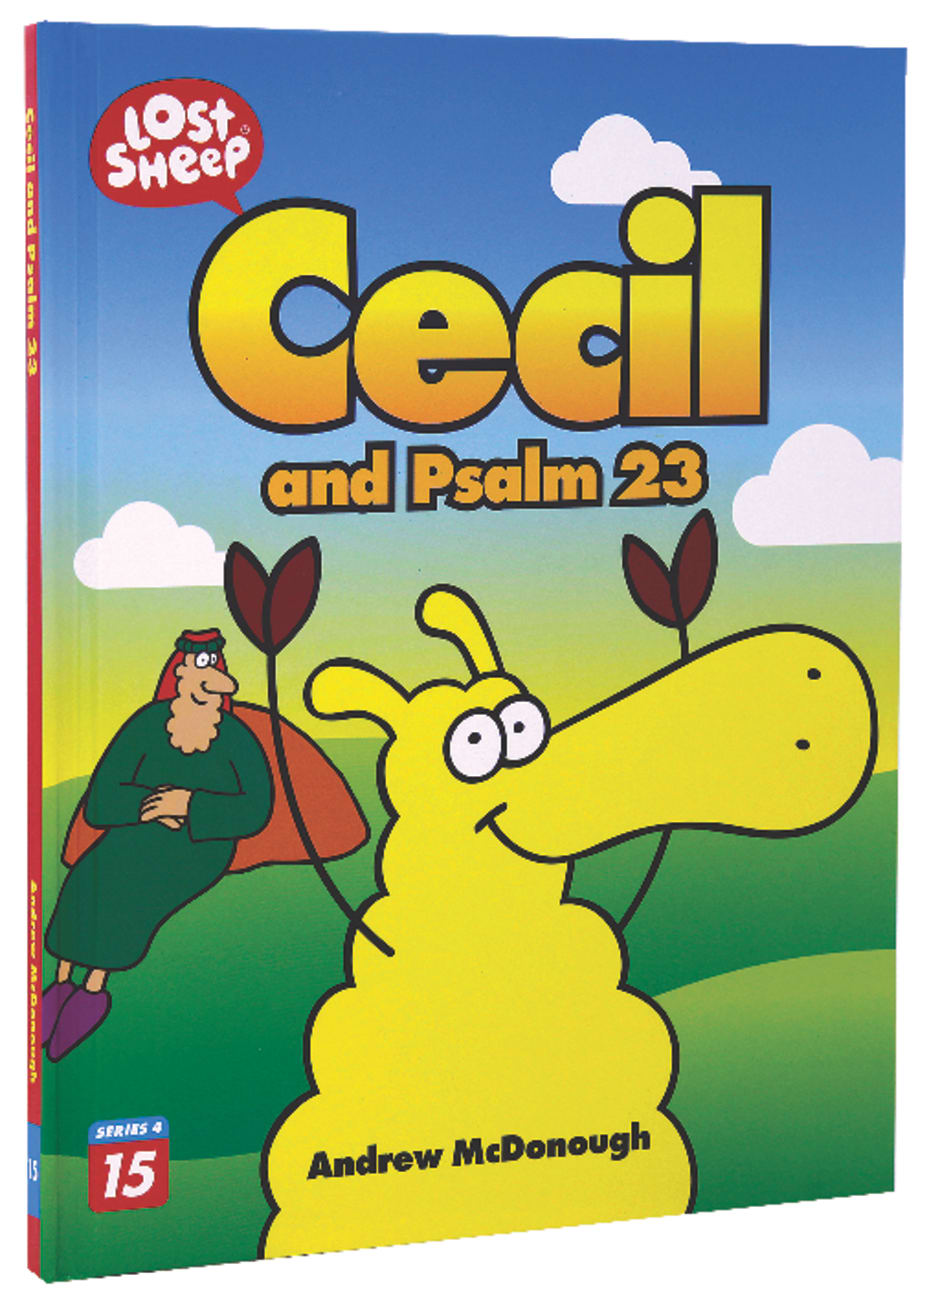 Cecil and Psalm 23 (Lost Sheep Series) Hardback